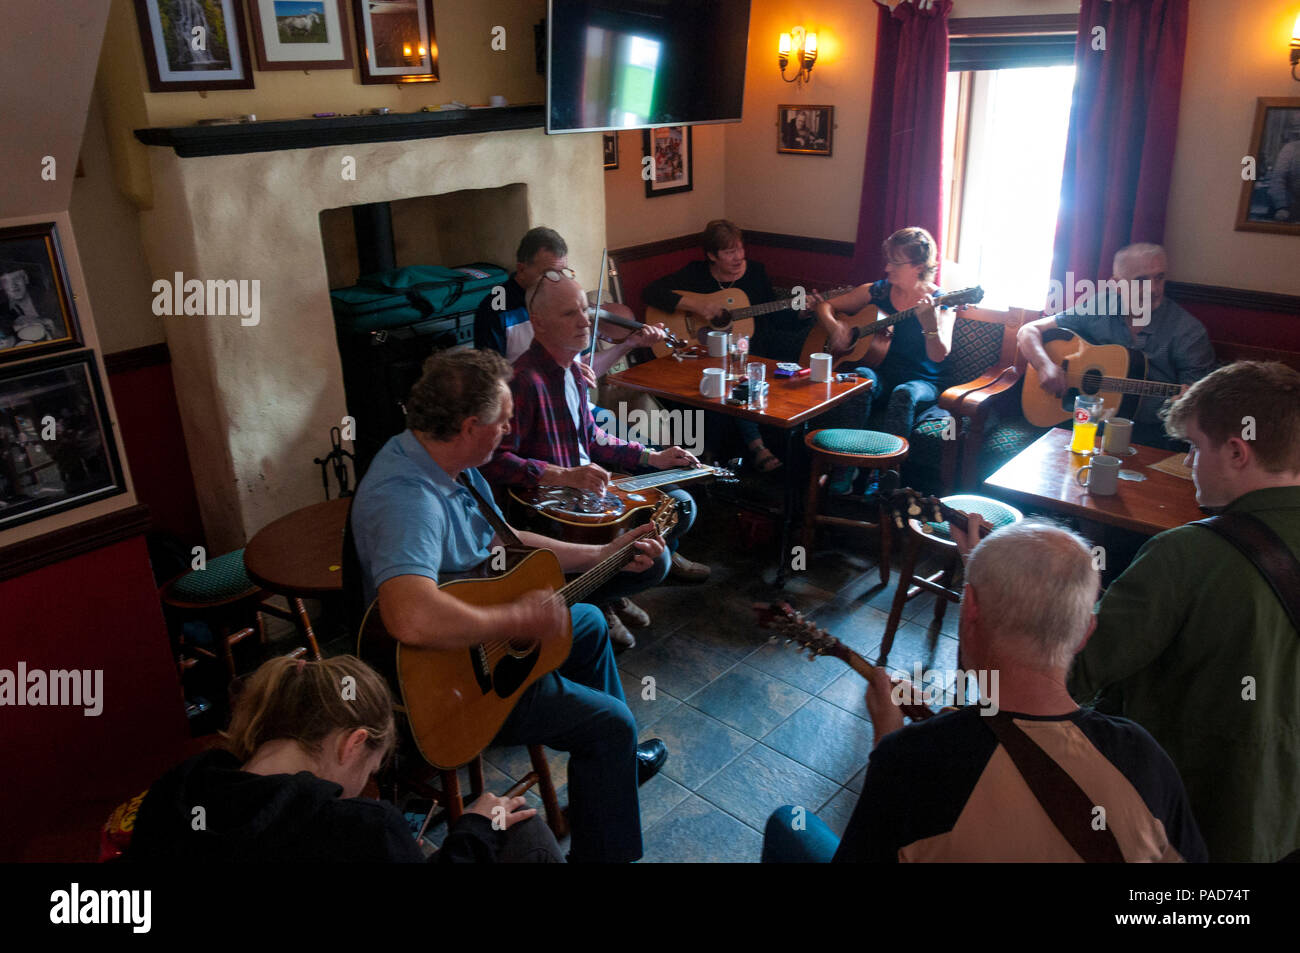 Ardara, County Donegal, Ireland. 22th July 2018. A musical buzz in The Beehive Bar as musicians play in the 11th annual Bluegrass Music Festival held in this north-west coastal village. Bluegrass music has links with the traditional music taken to USA by emigrating Irish and Scottish people in the 19th century. Credit: Richard Wayman/Alamy Live News Stock Photo